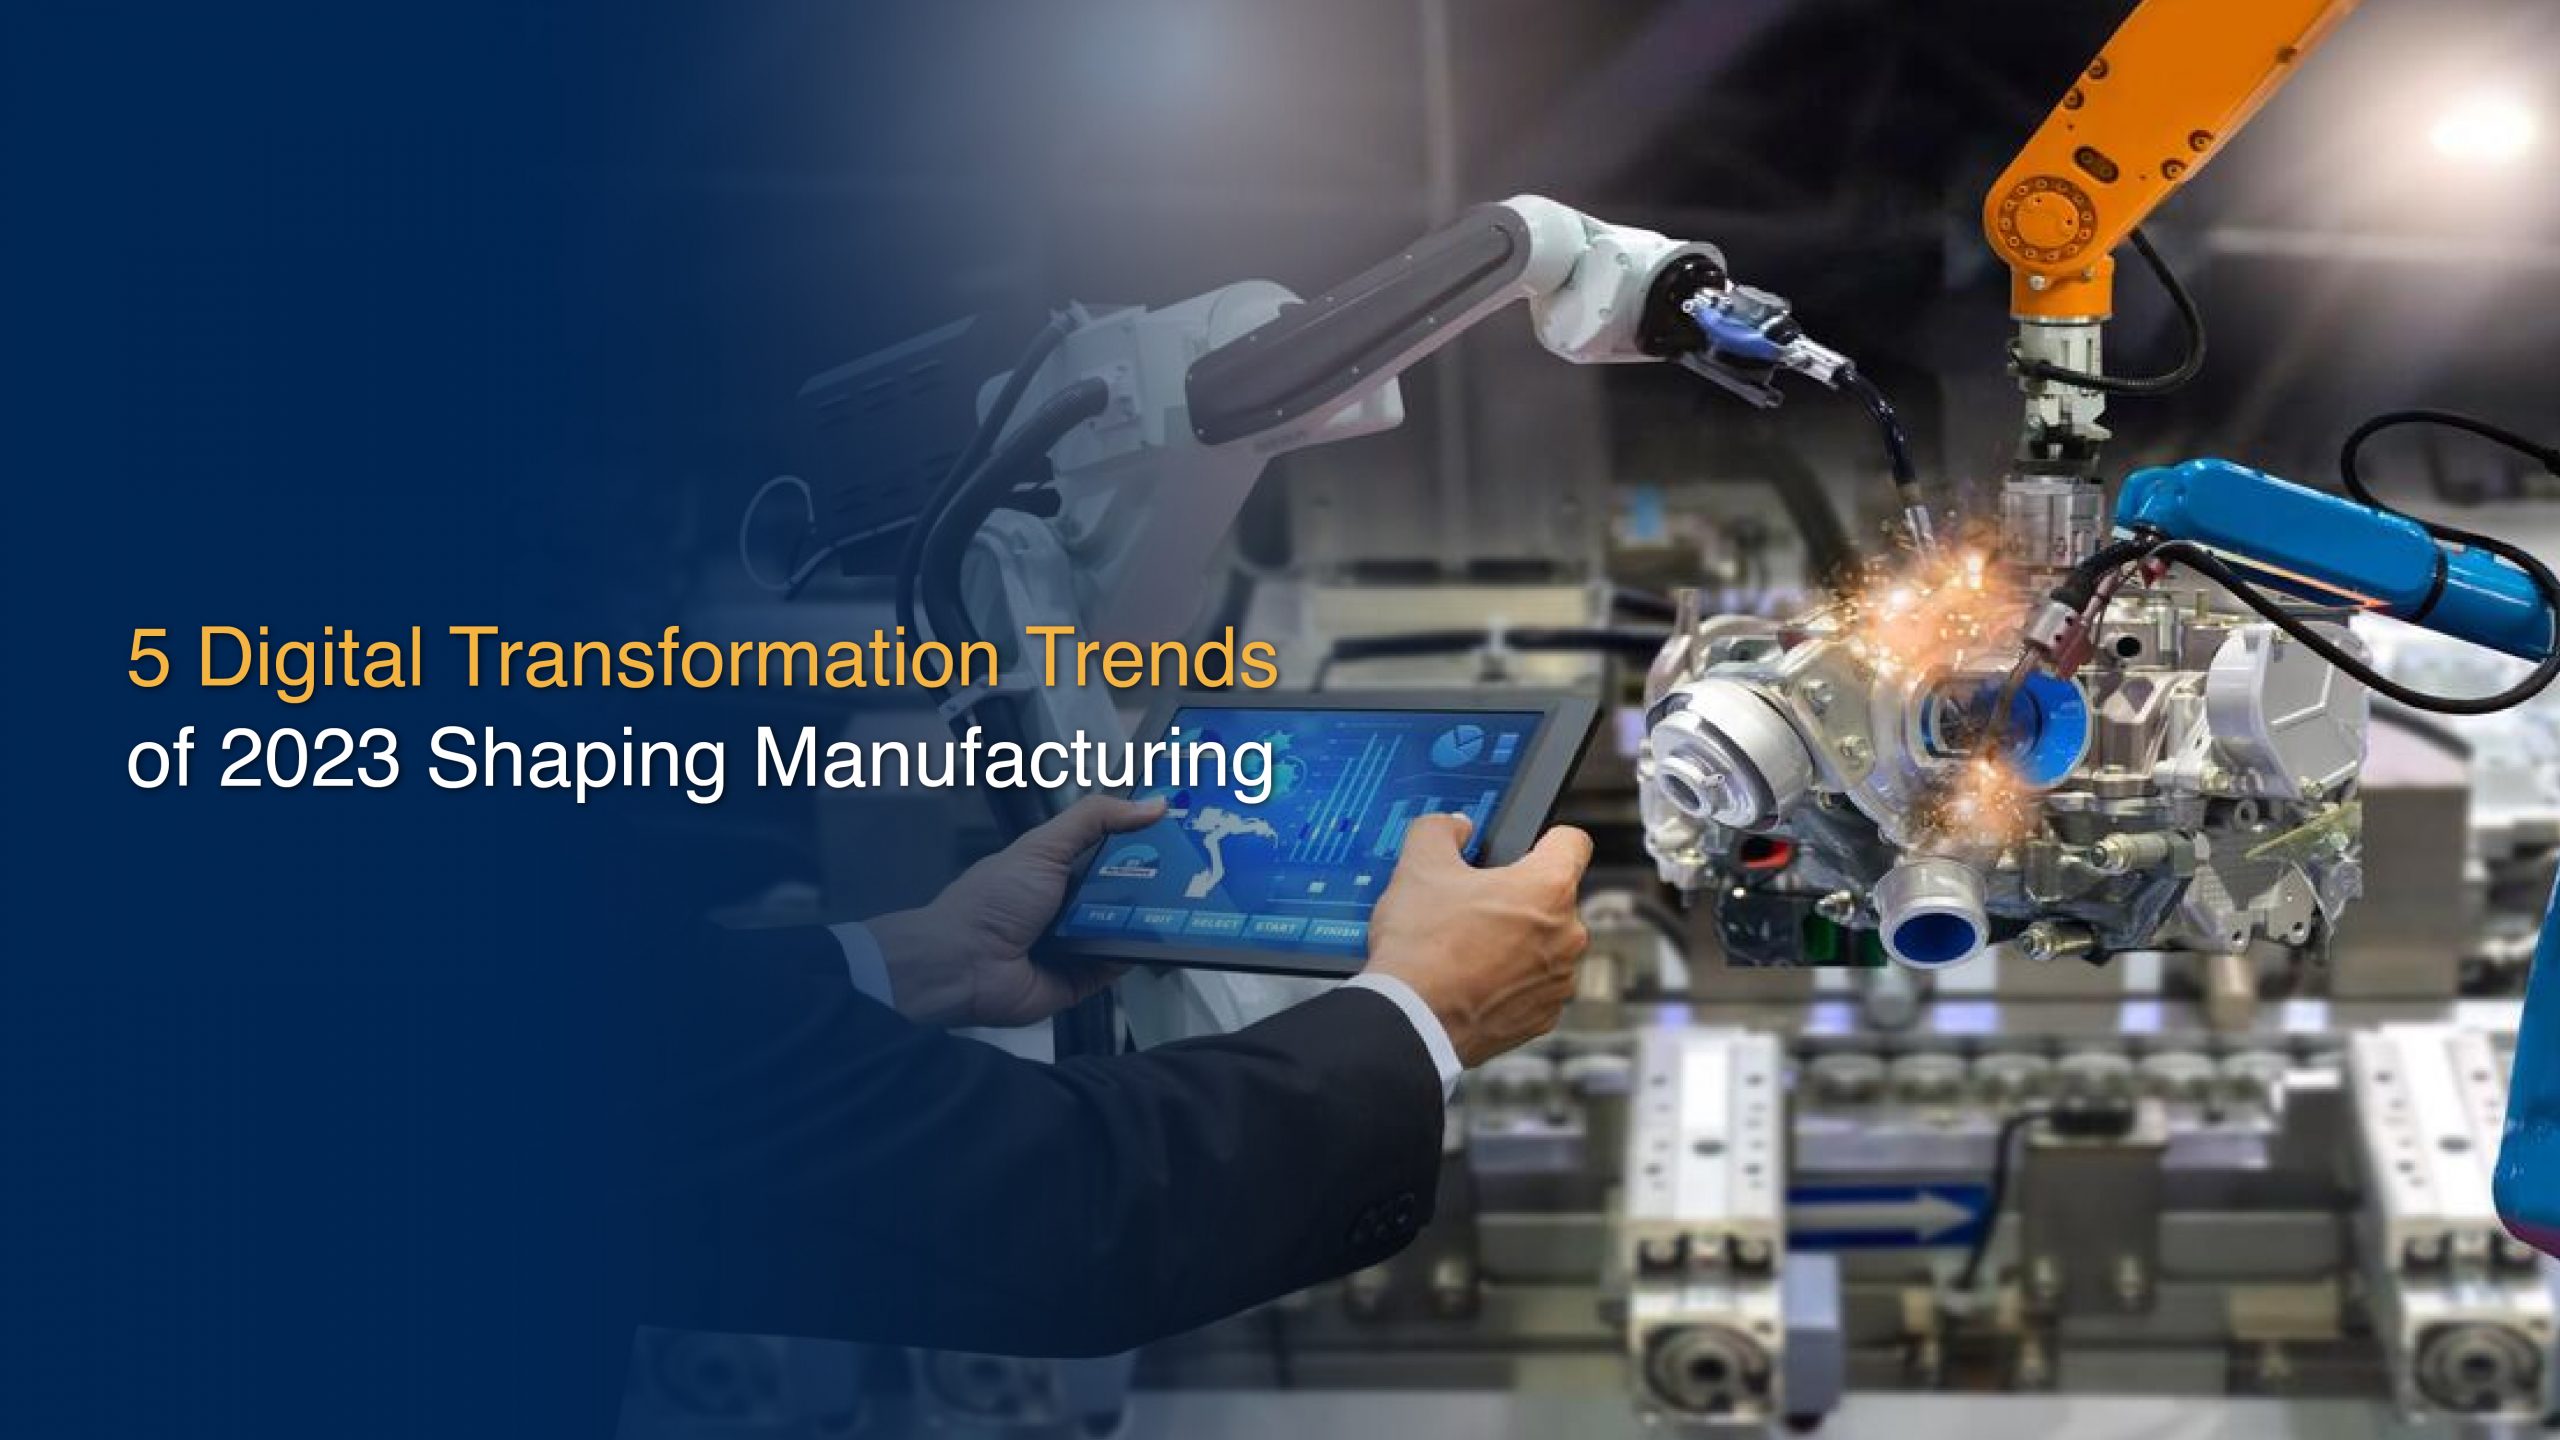 5 Digital Transformation Trends of 2023 Shaping Manufacturing